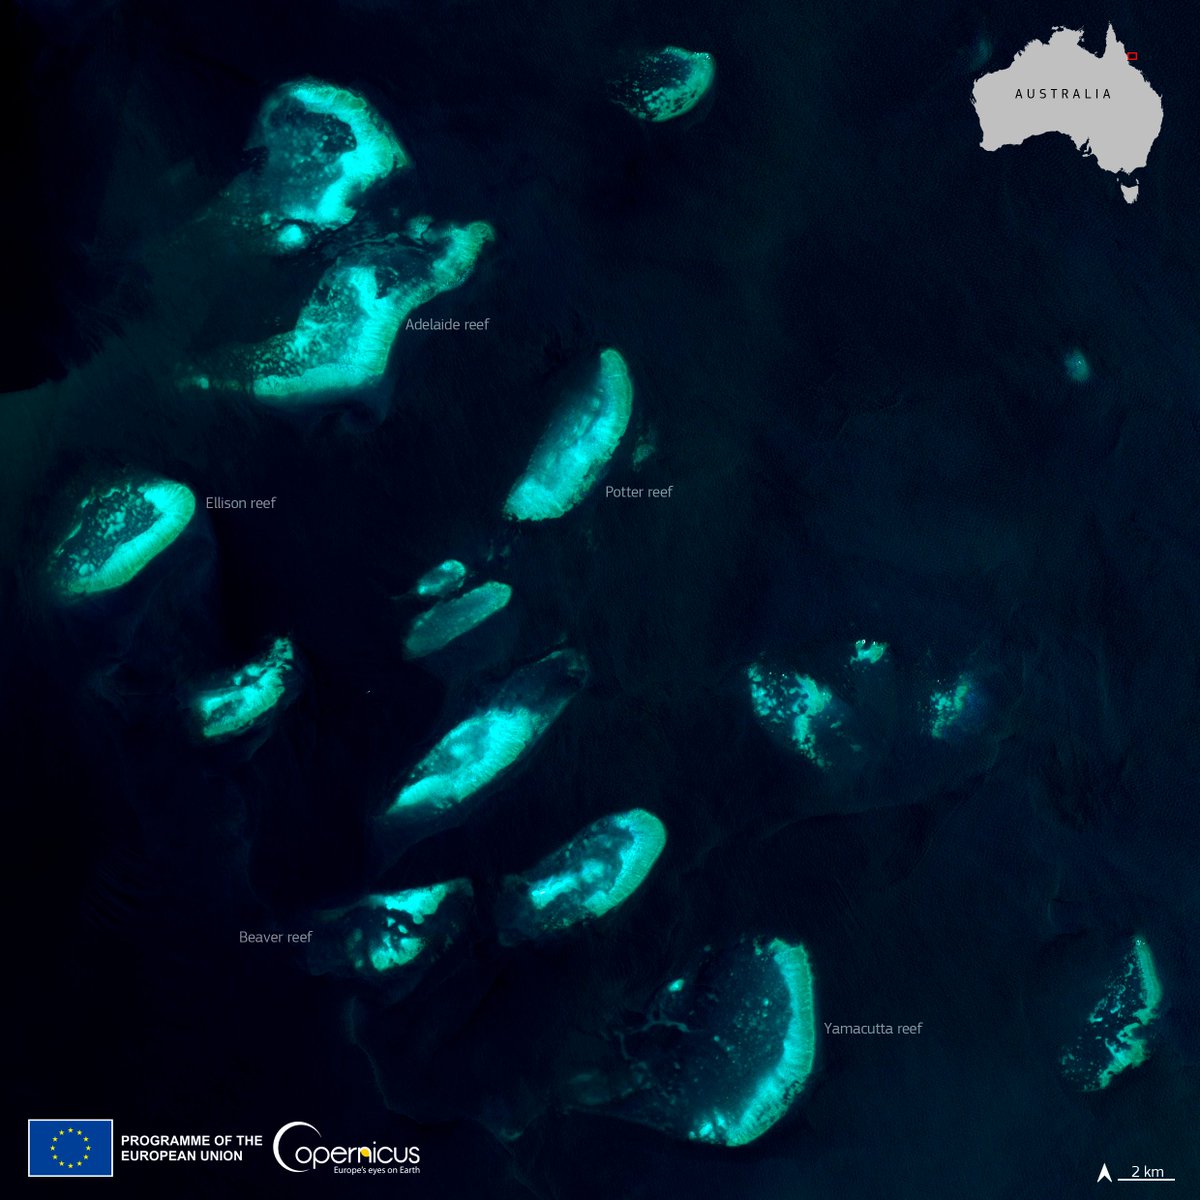 The 5th 🪸 coral bleaching event in 8 years is a reality Ocean temperatures are rising causing biodiversity degradation @CopernicusEU #Sentinel2 acquired this image of the reefs near 🇦🇺 Discover how we work to protect Europe's ocean, seas and coasts 👉 europa.eu/!vwx7Nd